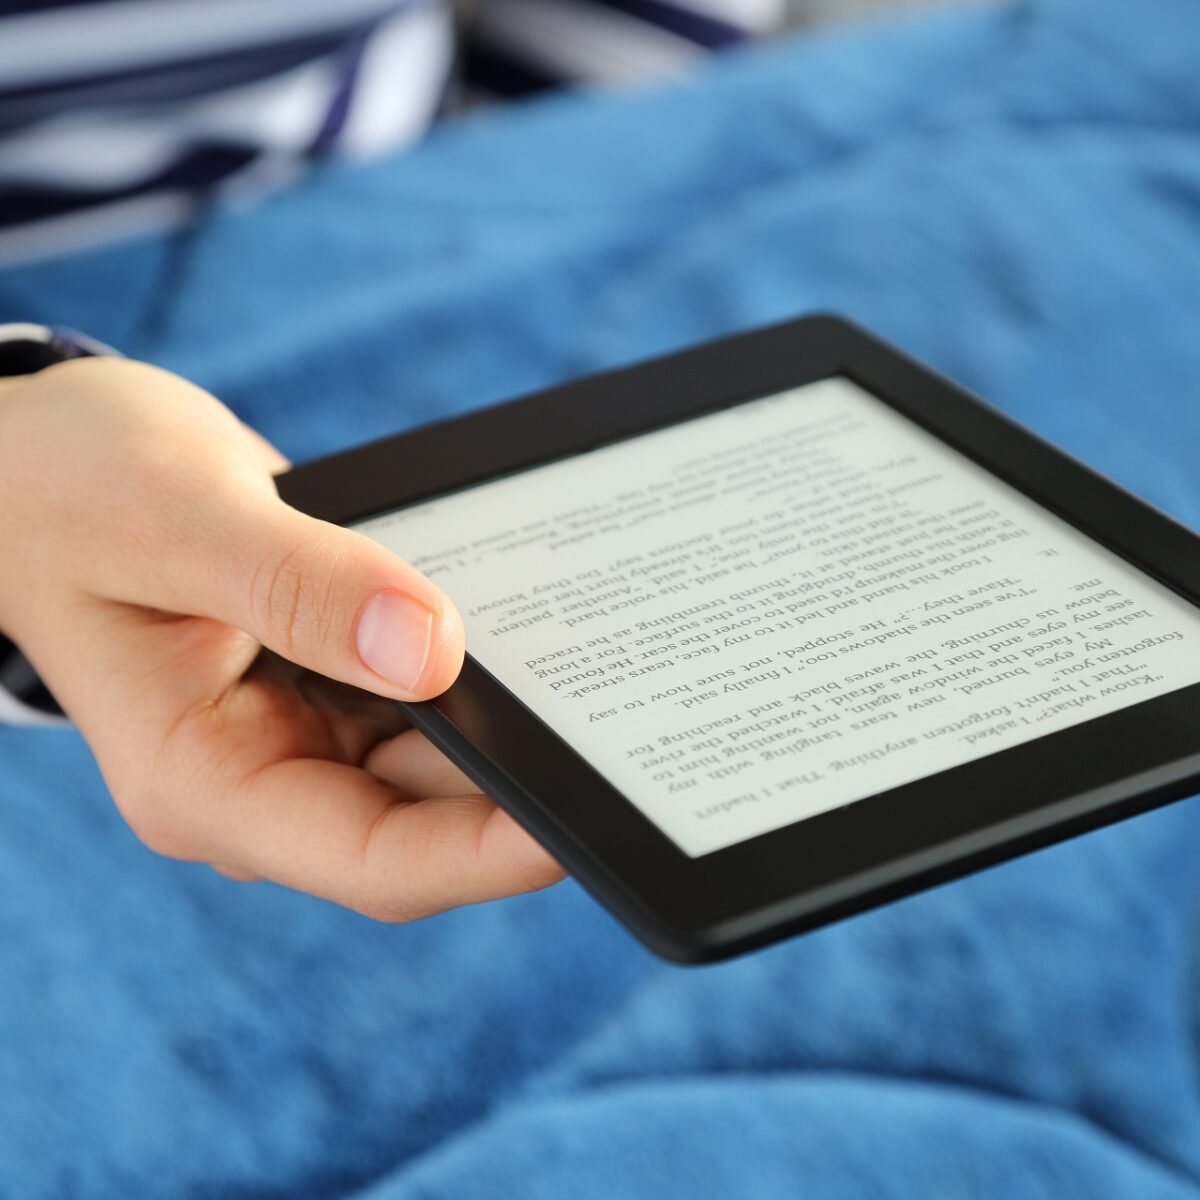 how to read documents in kindle fire